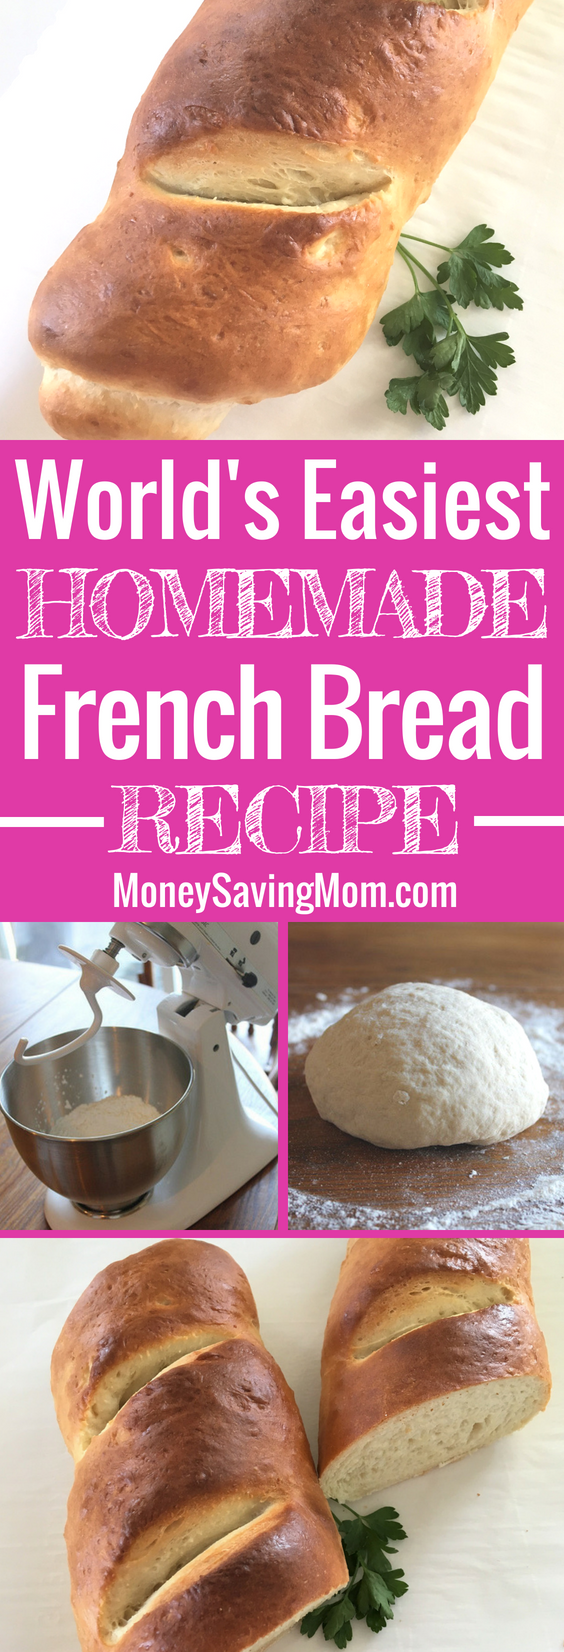 This French Bread recipe is SO easy to make, and it's super delicious -- perfect to whip up for weeknight dinners!